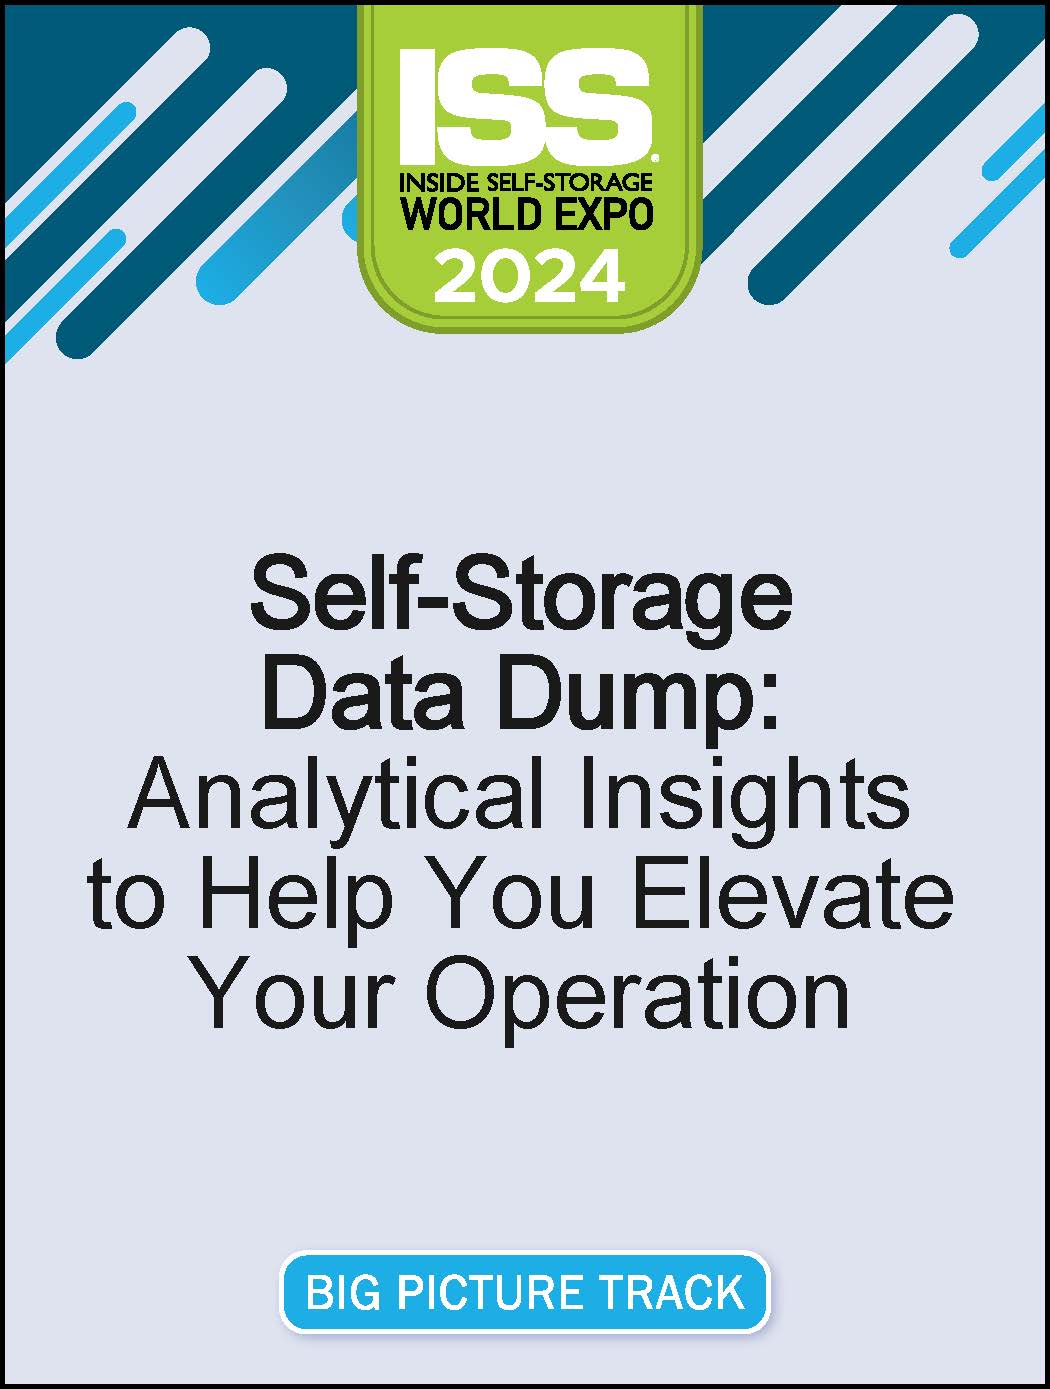 Video Pre-Order PDF - Self-Storage Data Dump: Analytical Insights to Help You Elevate Your Operation